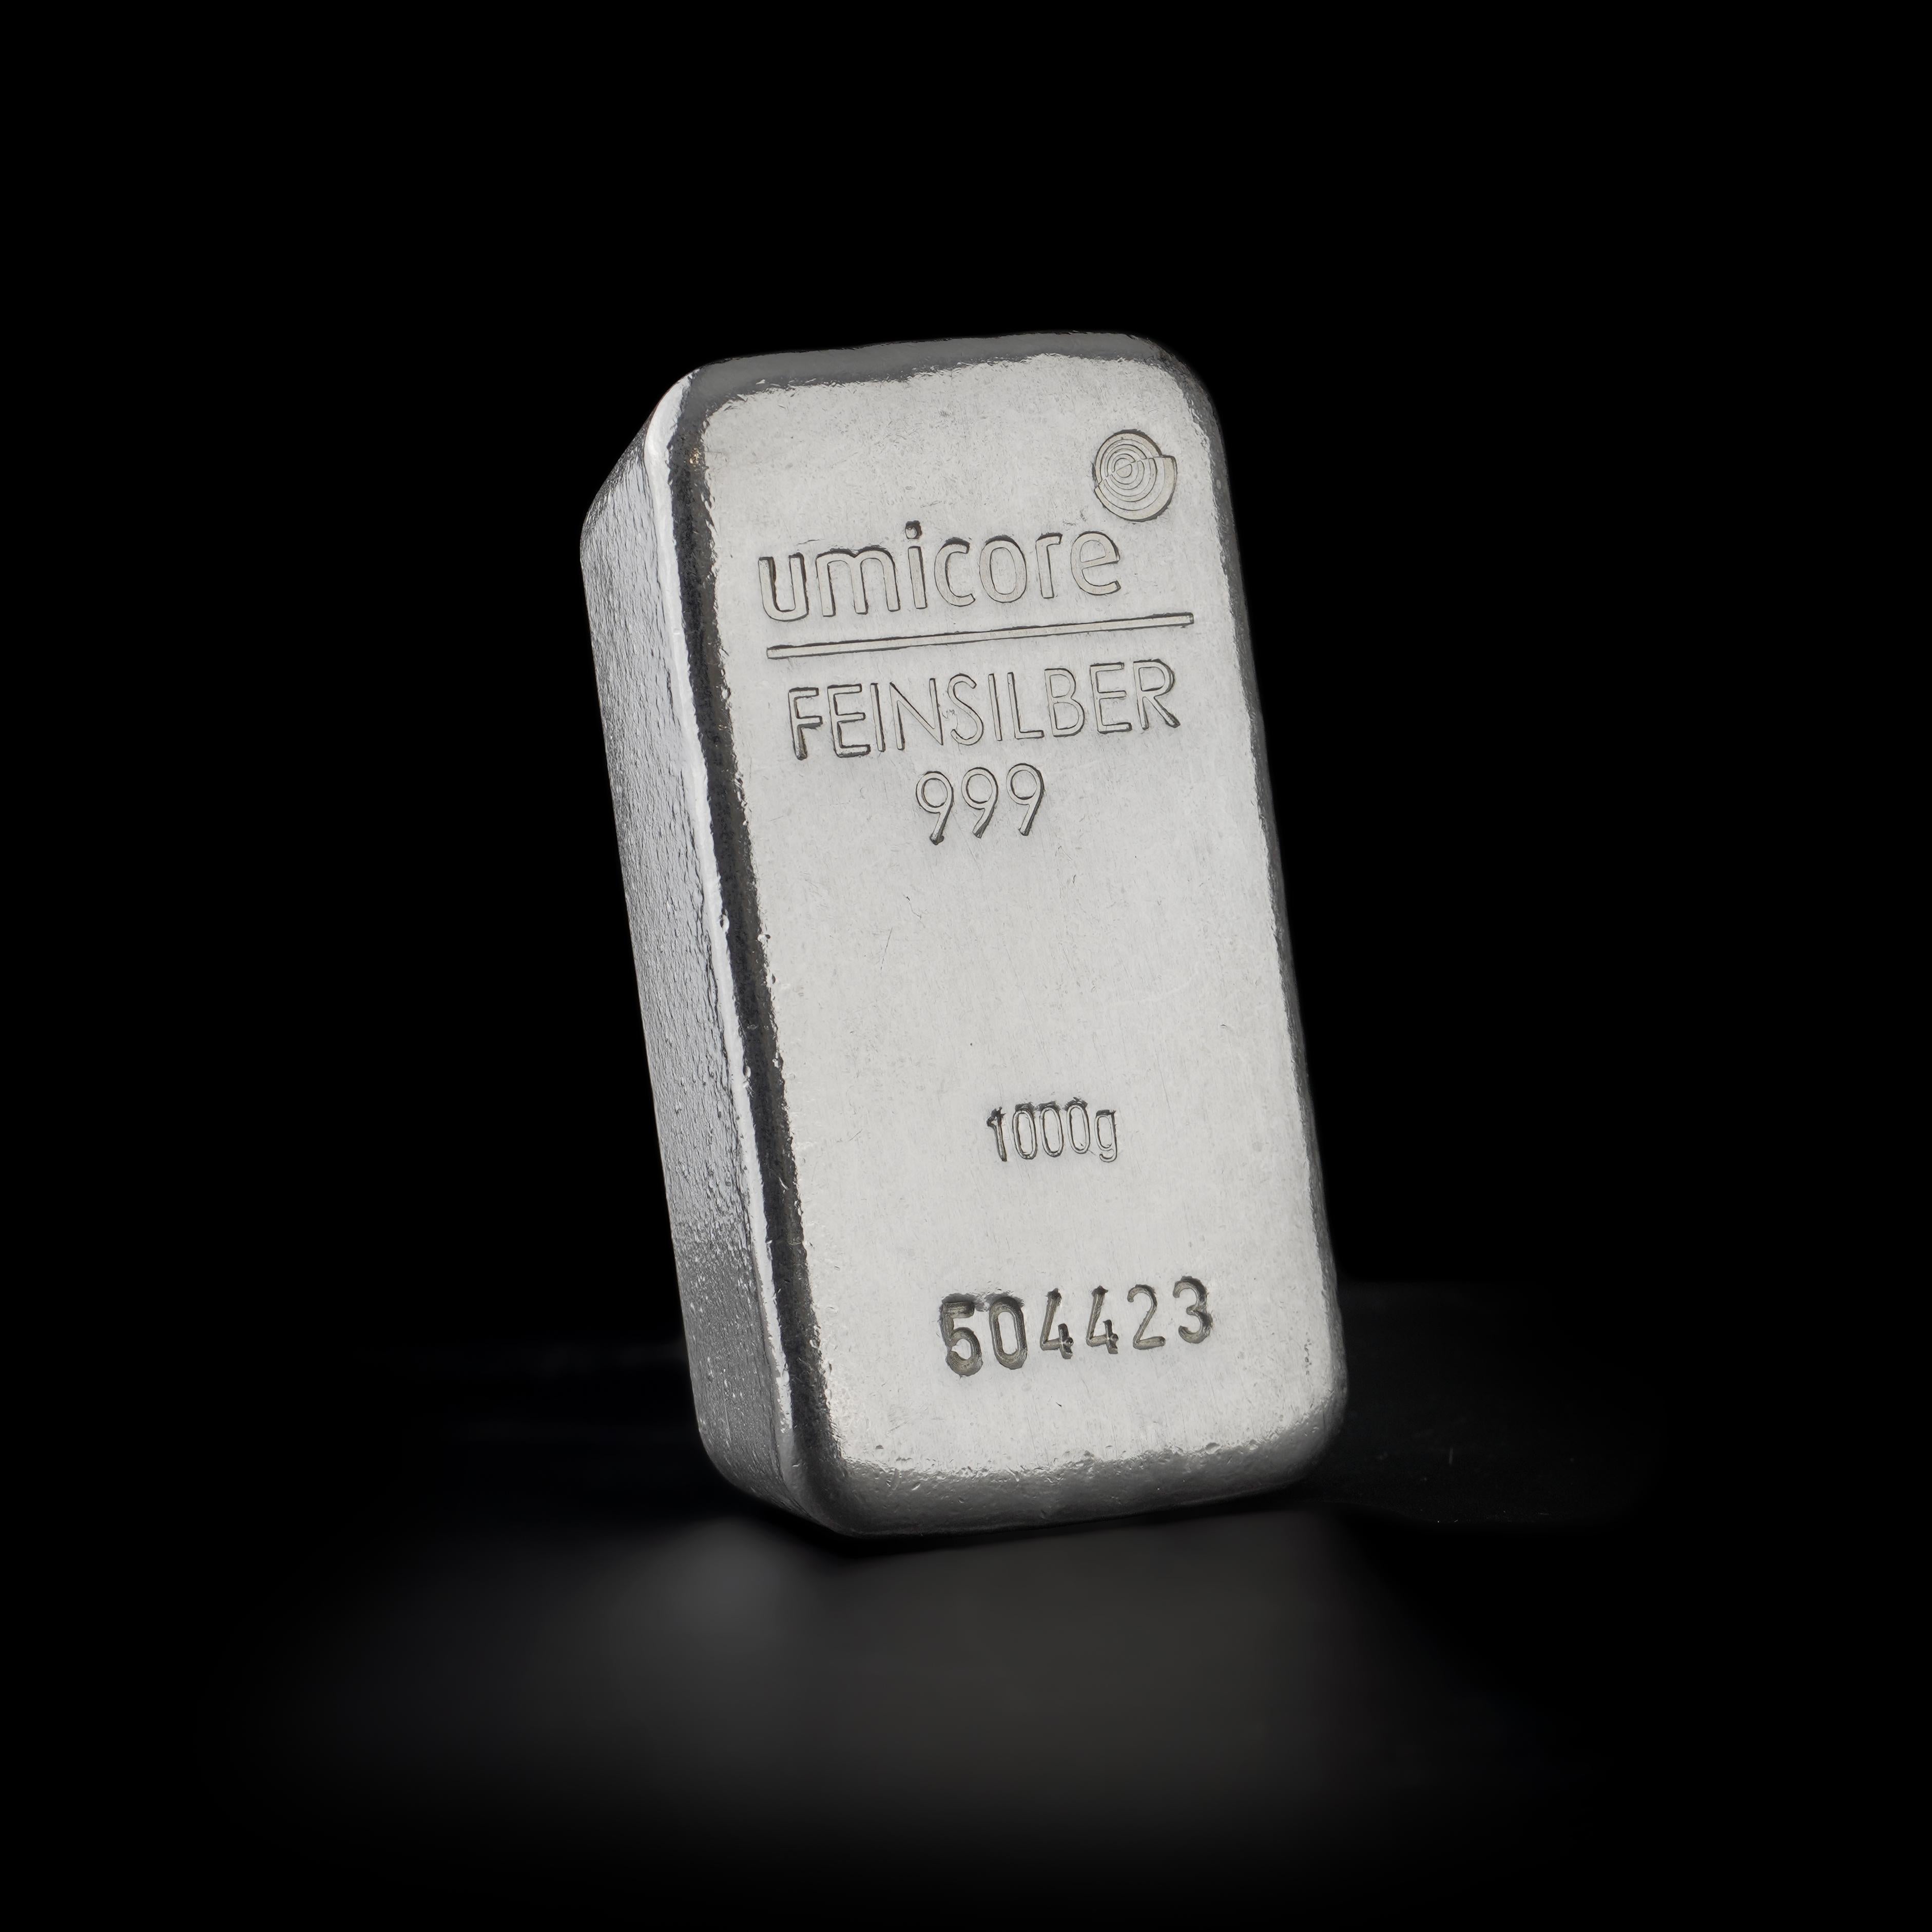 Umicore 1KG silver bar
Quantity Available: 10
Please note serial numbers will differ from the ones pictured.